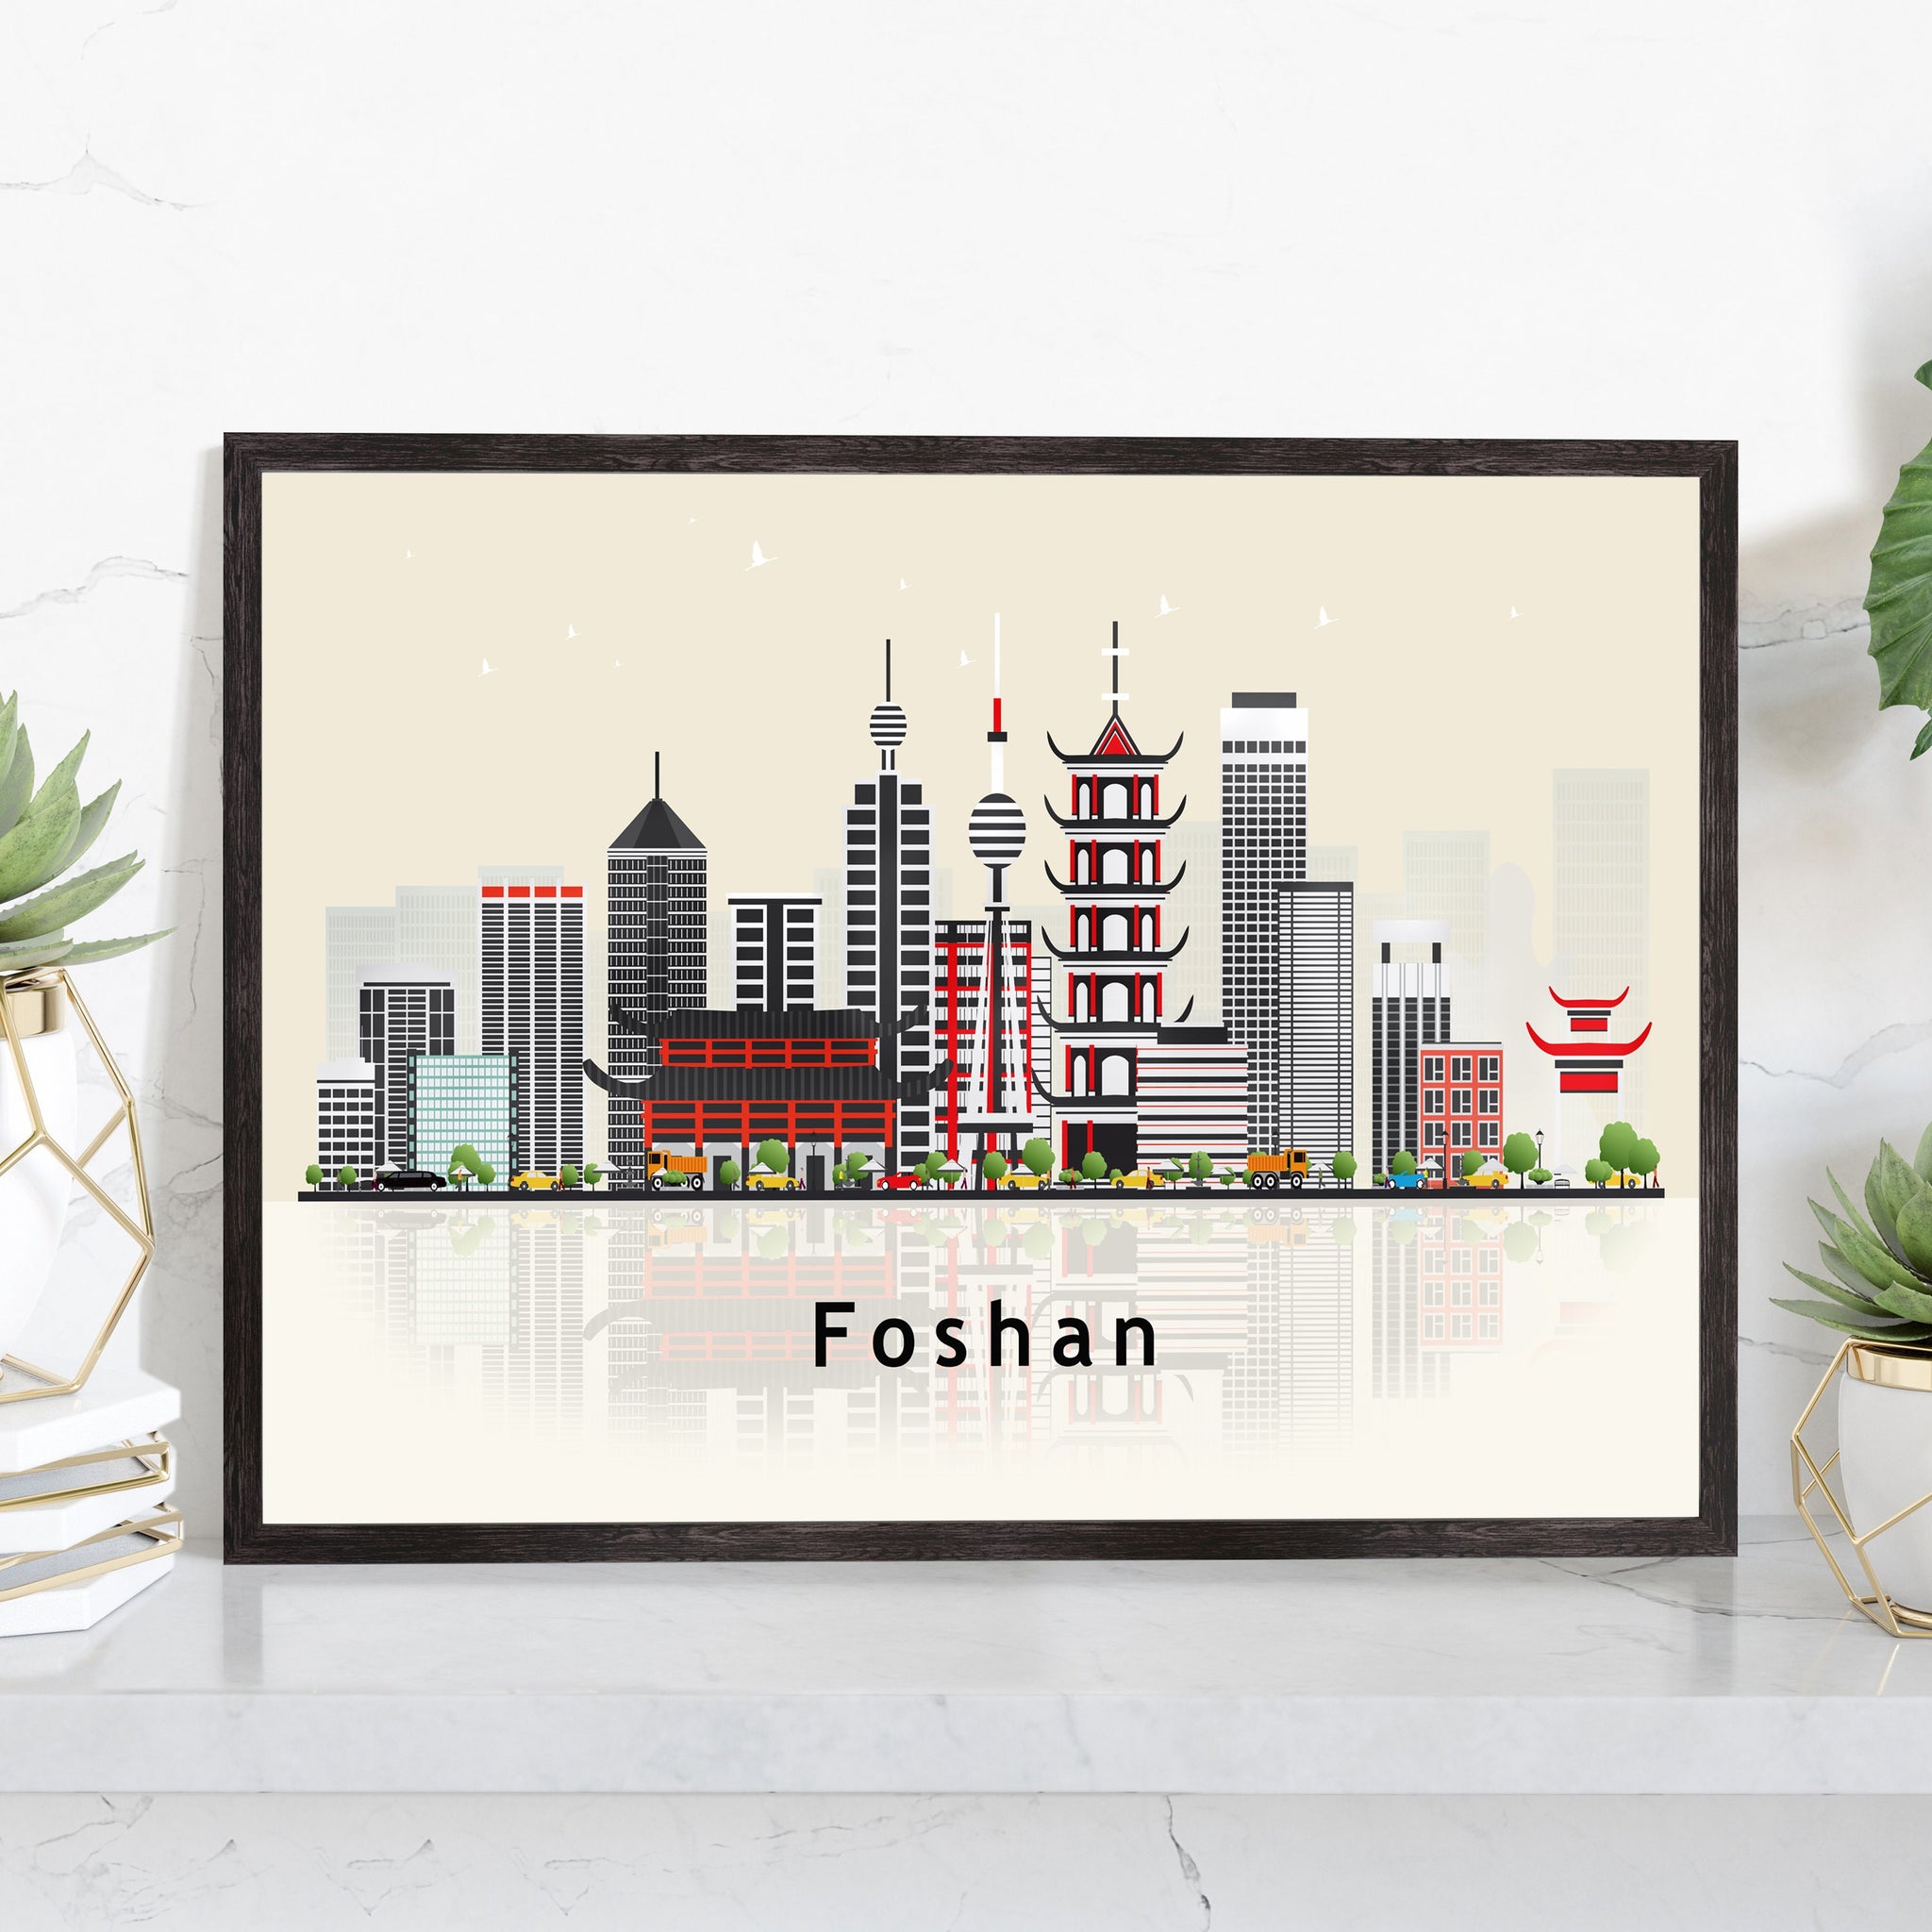 FOSHAN CHINA Illustration skyline poster, Modern skyline cityscape poster, China city skyline landmark map poster, Home wall decoration